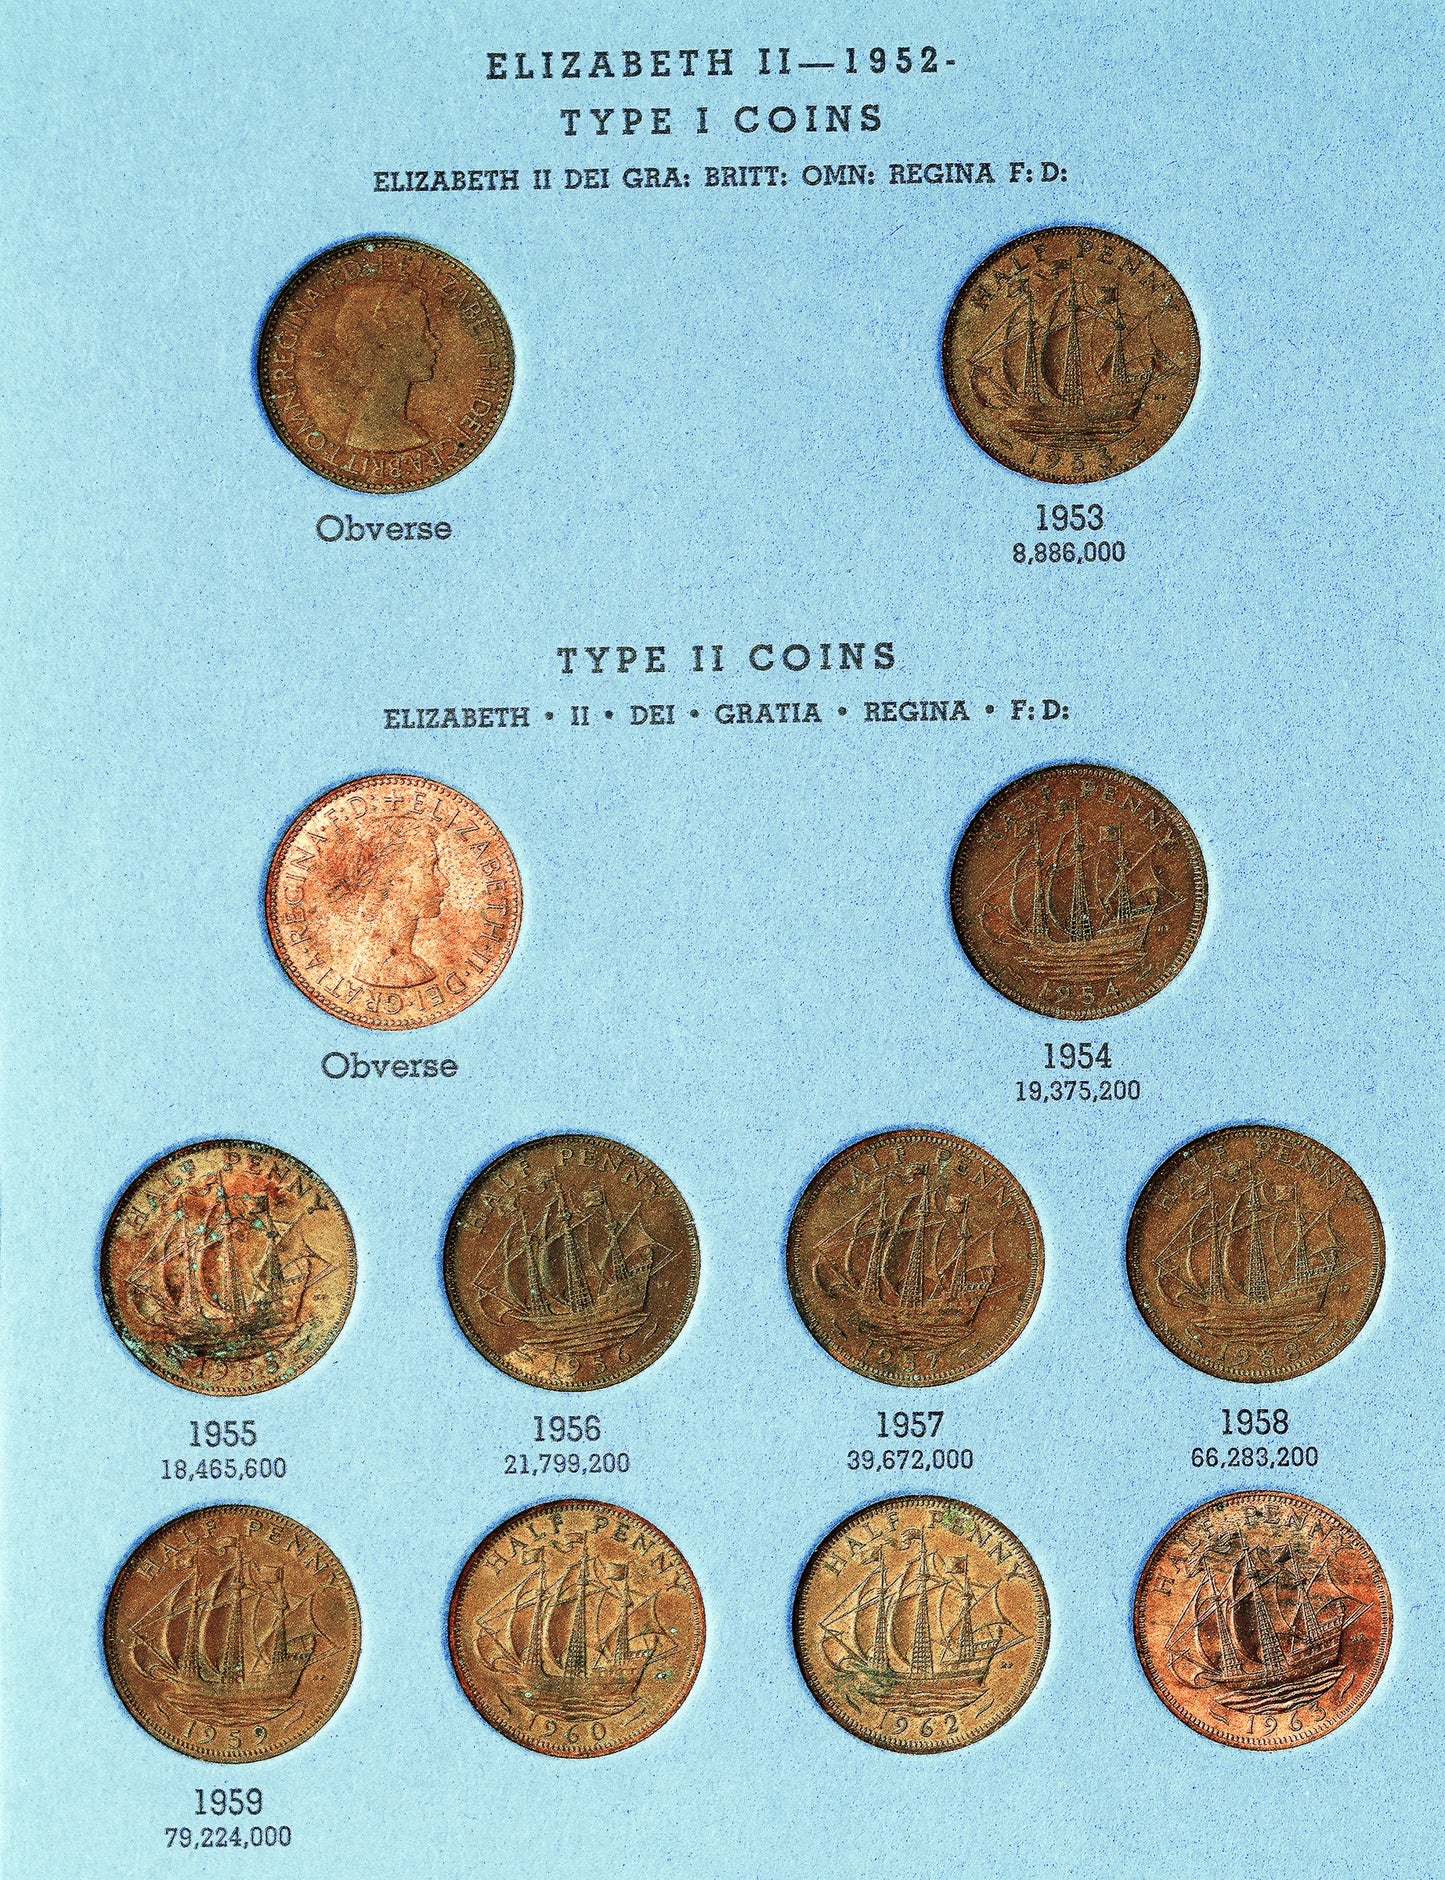 British Half Pennies - Complete collection - 1937 - 1966